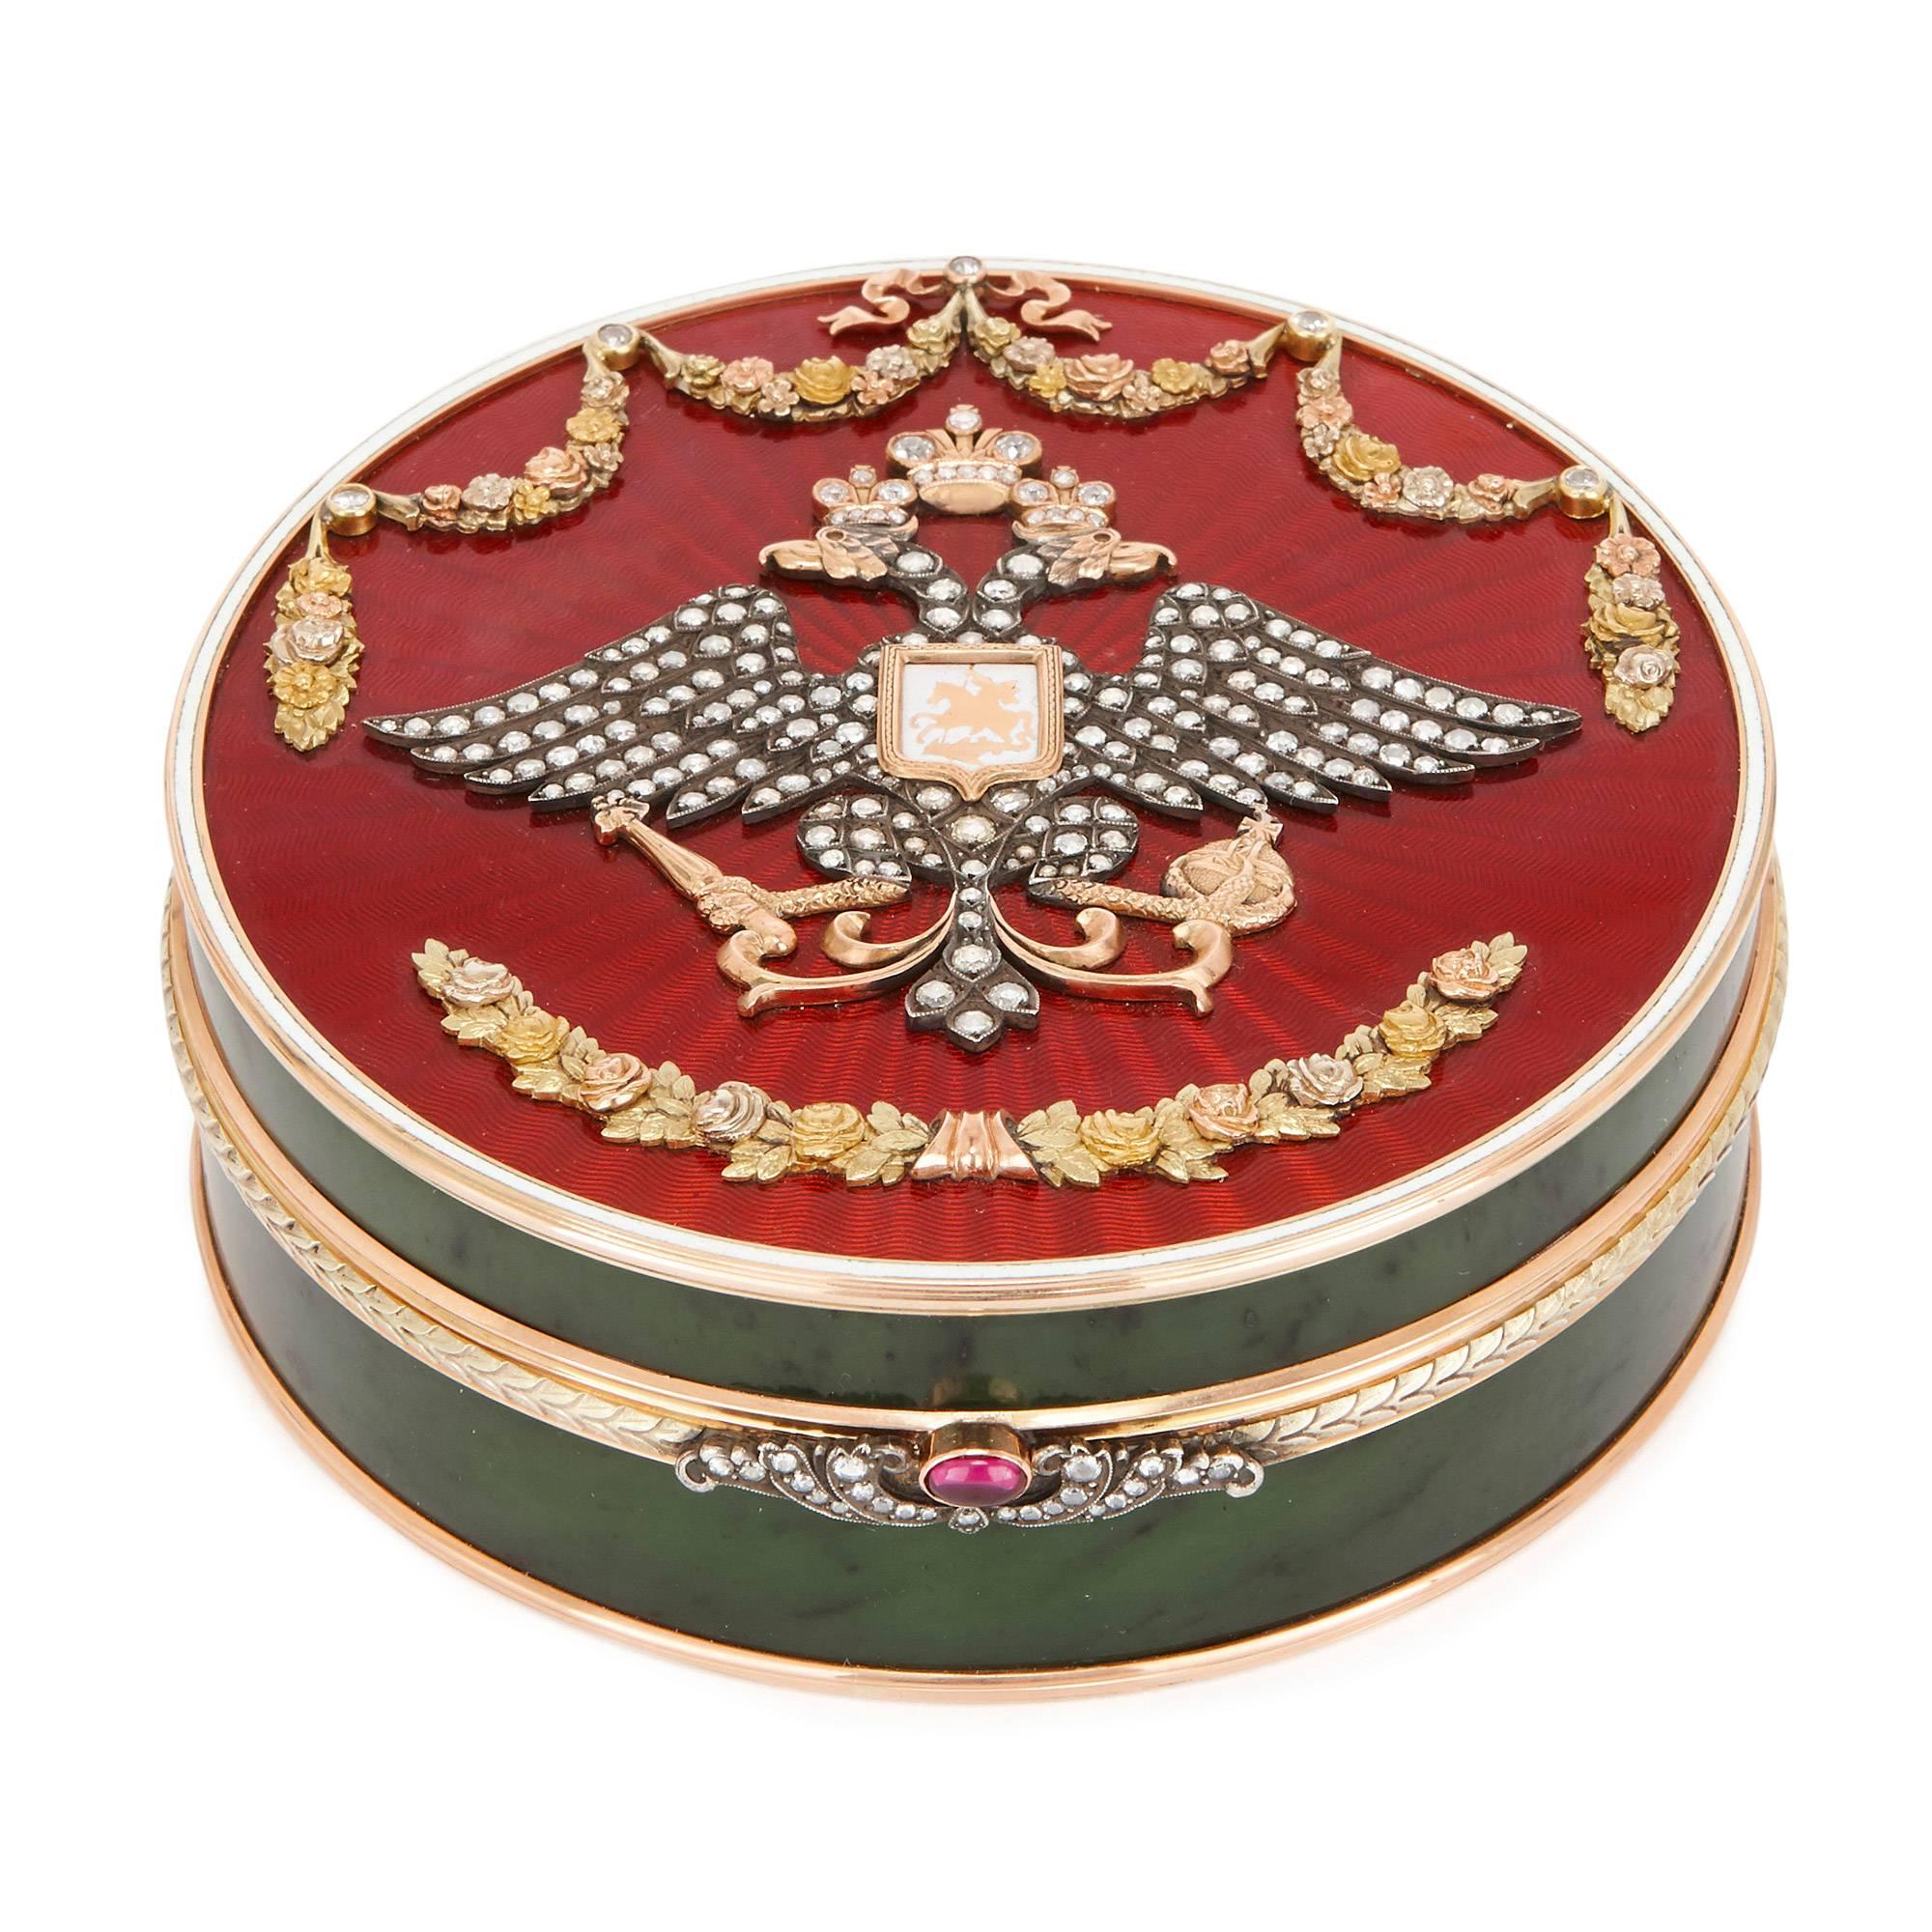 Gold, Guilloche Enamel and Precious Stone Box, in the Style of Faberge